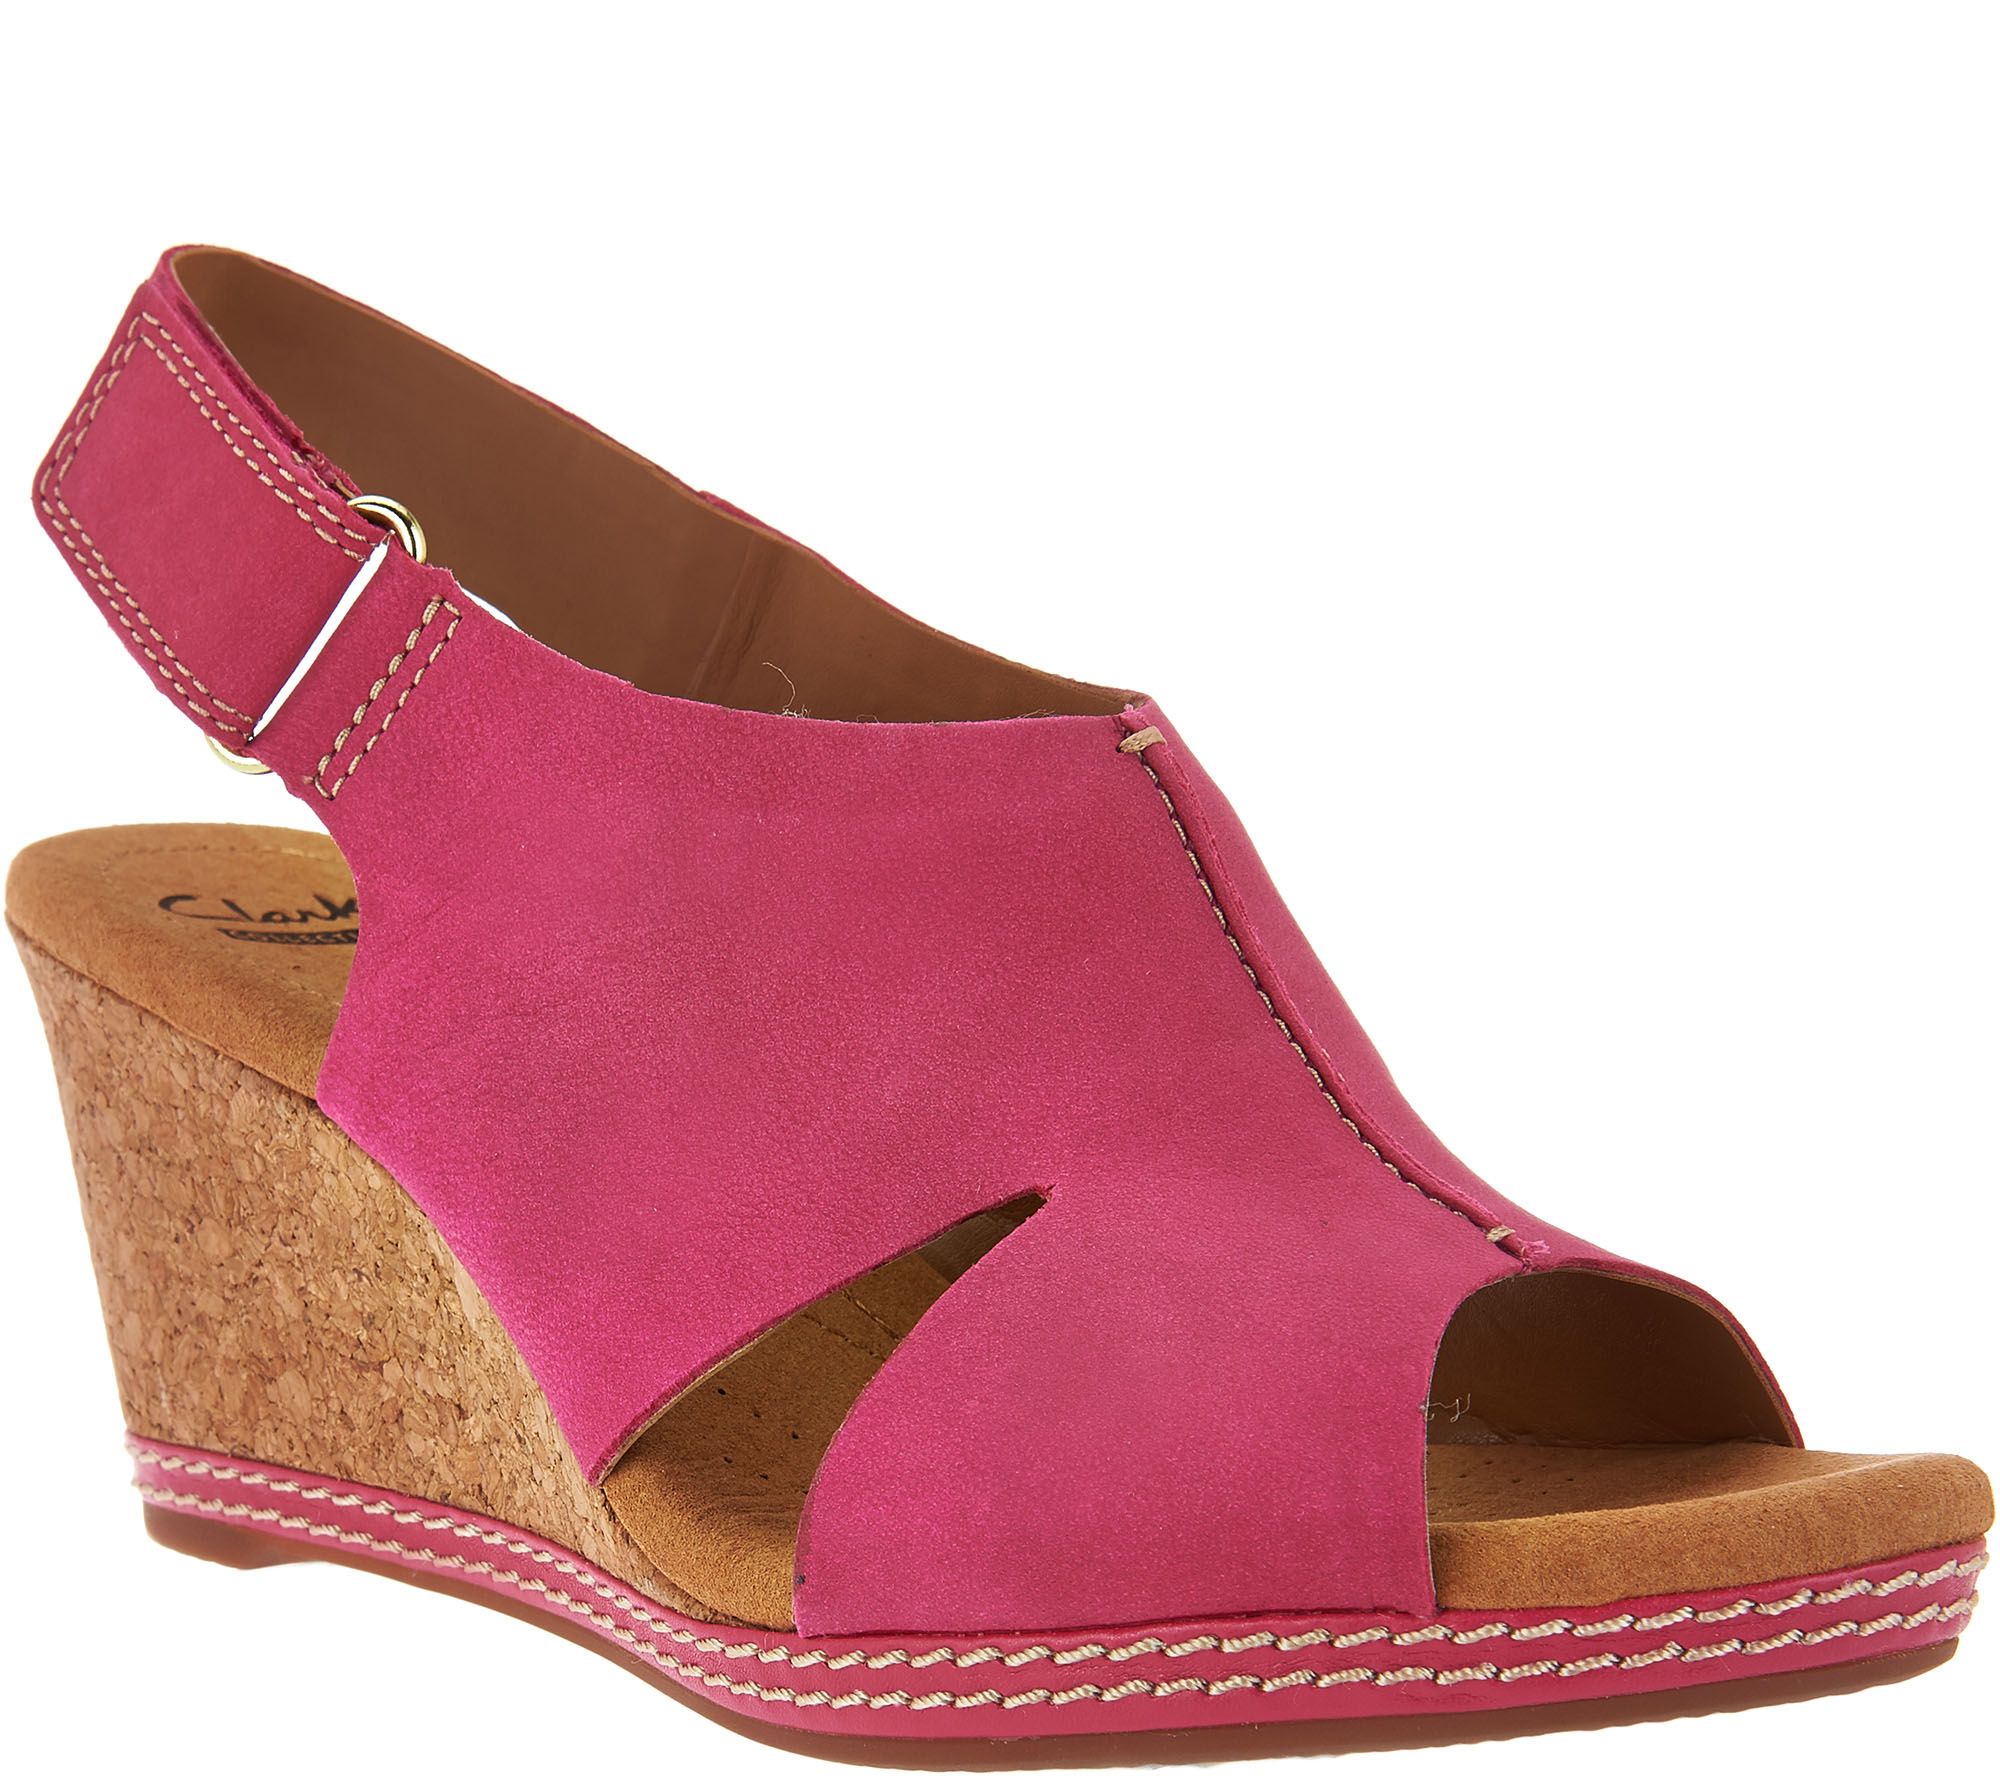 Clarks Nubuck Wedge Sandals with Backstrap - Helio Float - Page 1 — QVC.com